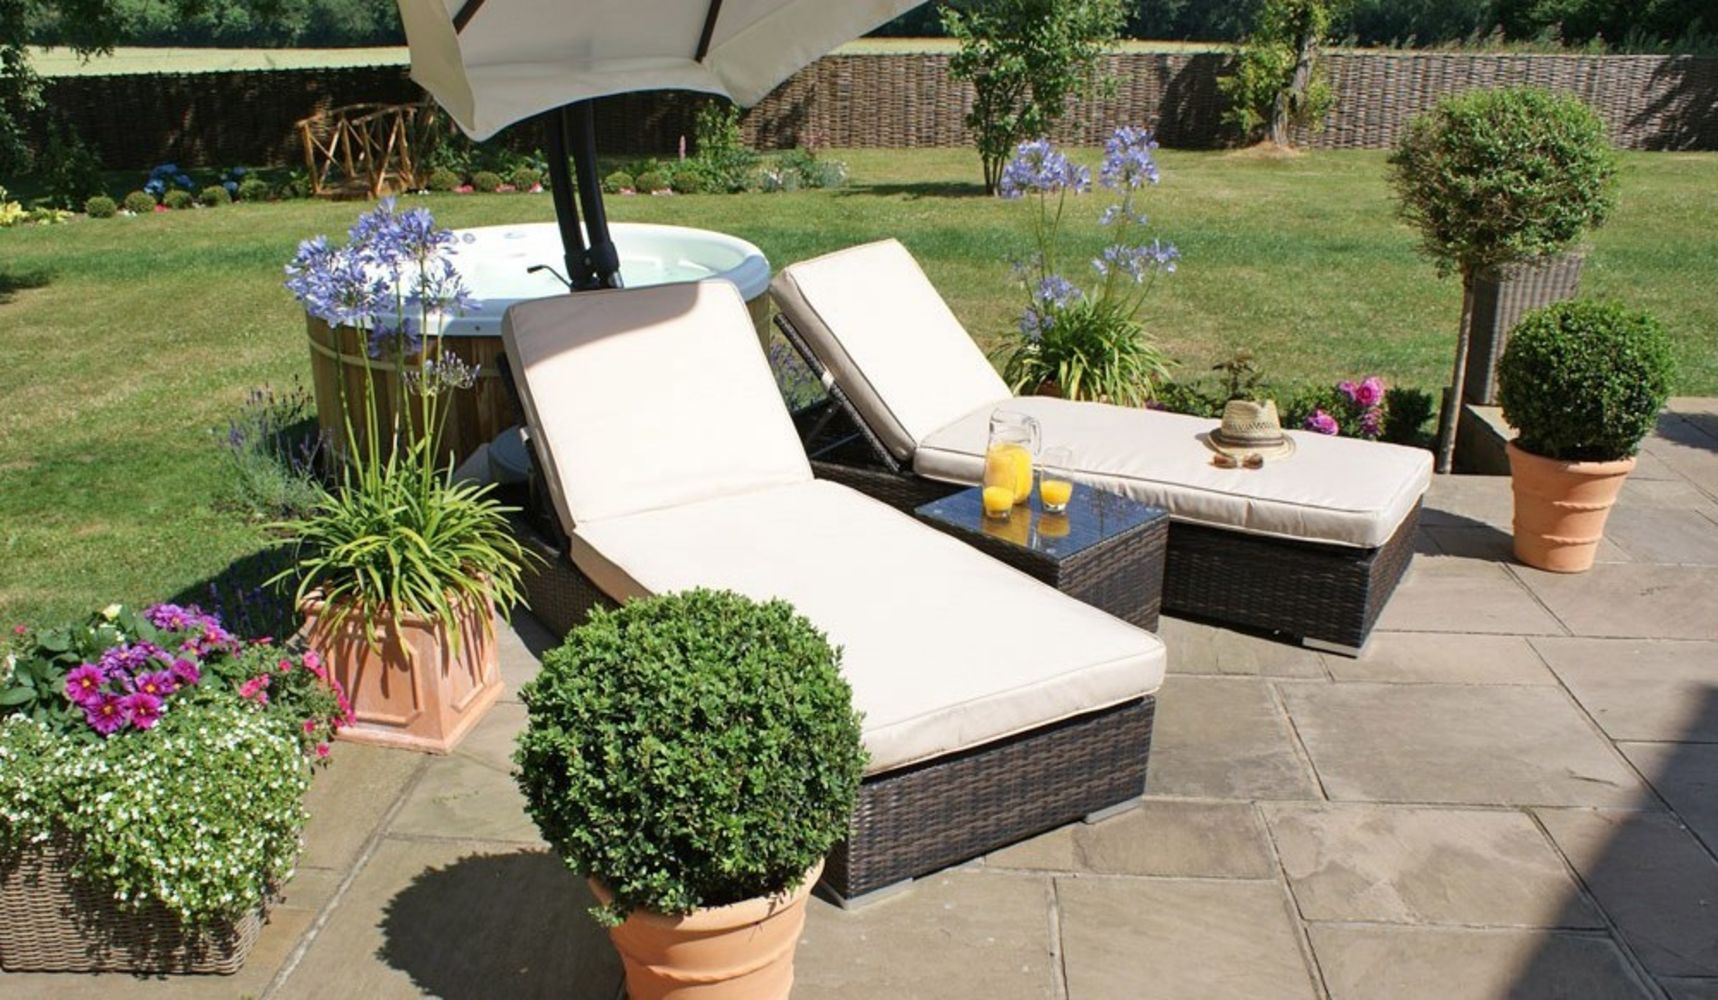 Brand New Rattan Garden Furniture: Exclusive Range Including Dining Sets, Day Beds, Sofa Sets & Sun Loungers